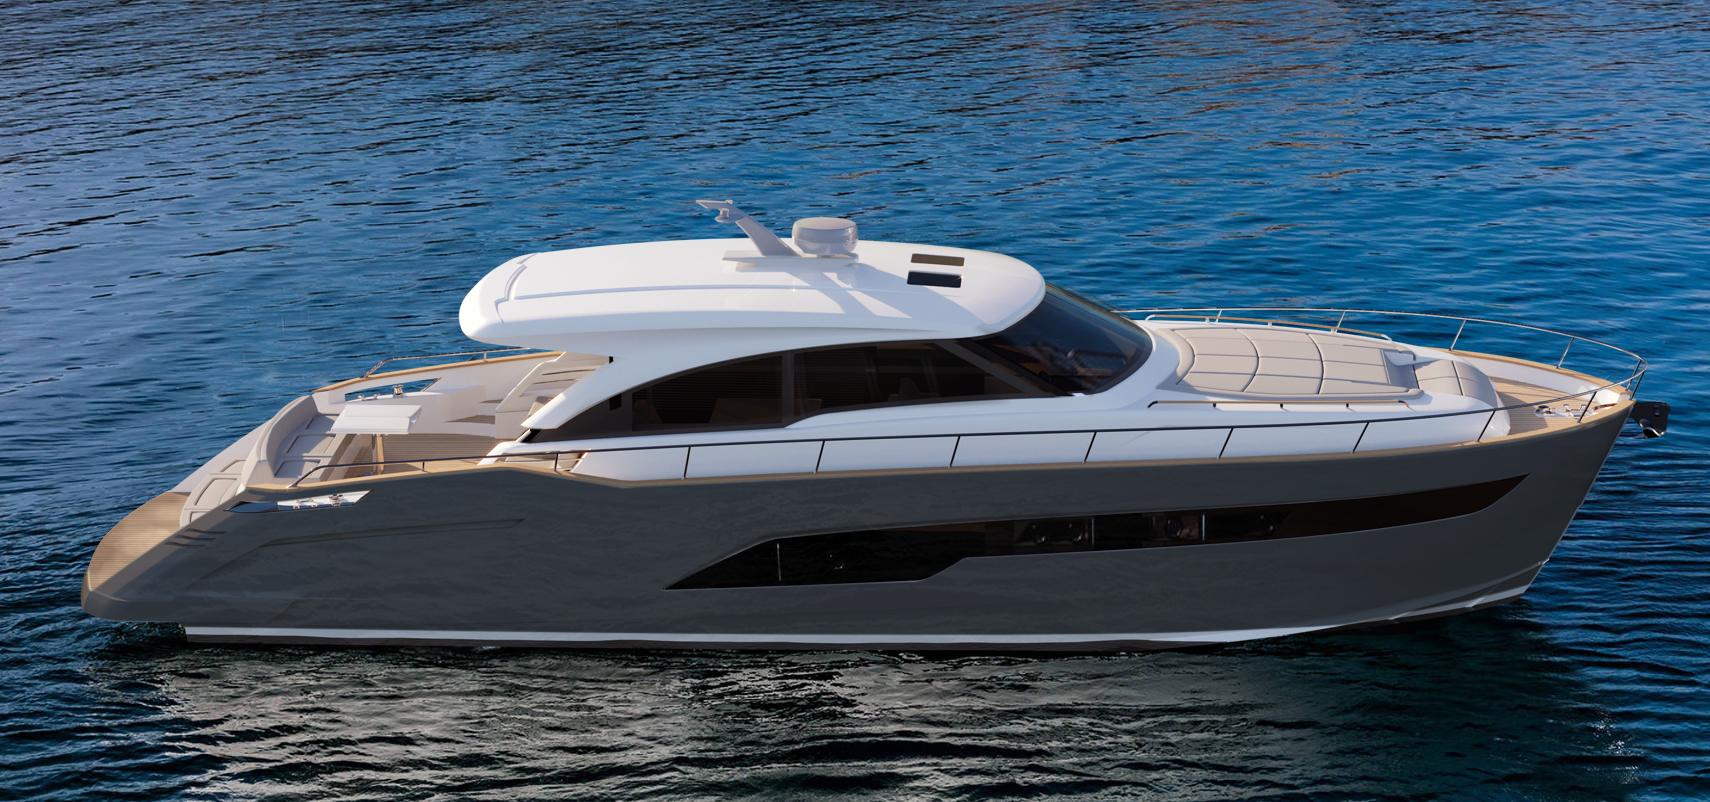 The 54'Mahòn model range, new entry from Austin Parker Yachts